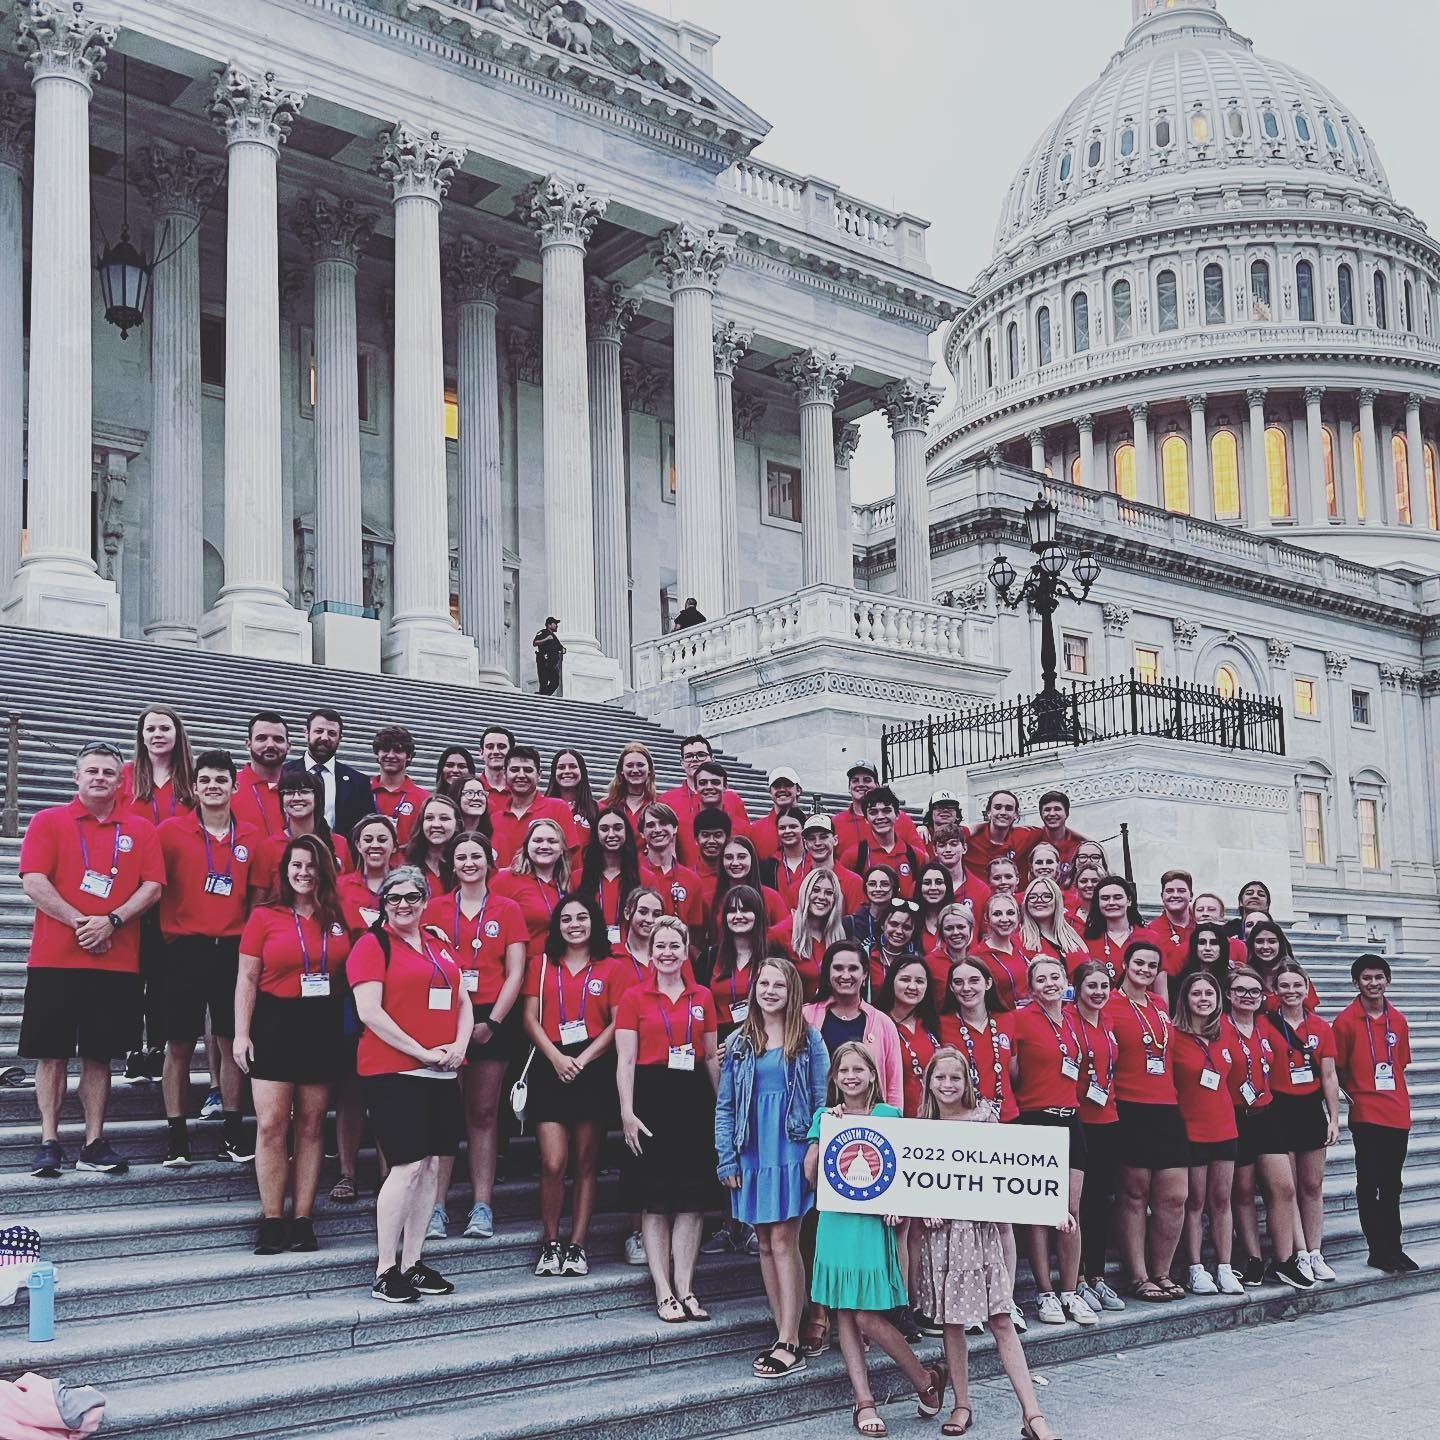 All Oklahoma Youth Tour students at the U.S. Capitol.